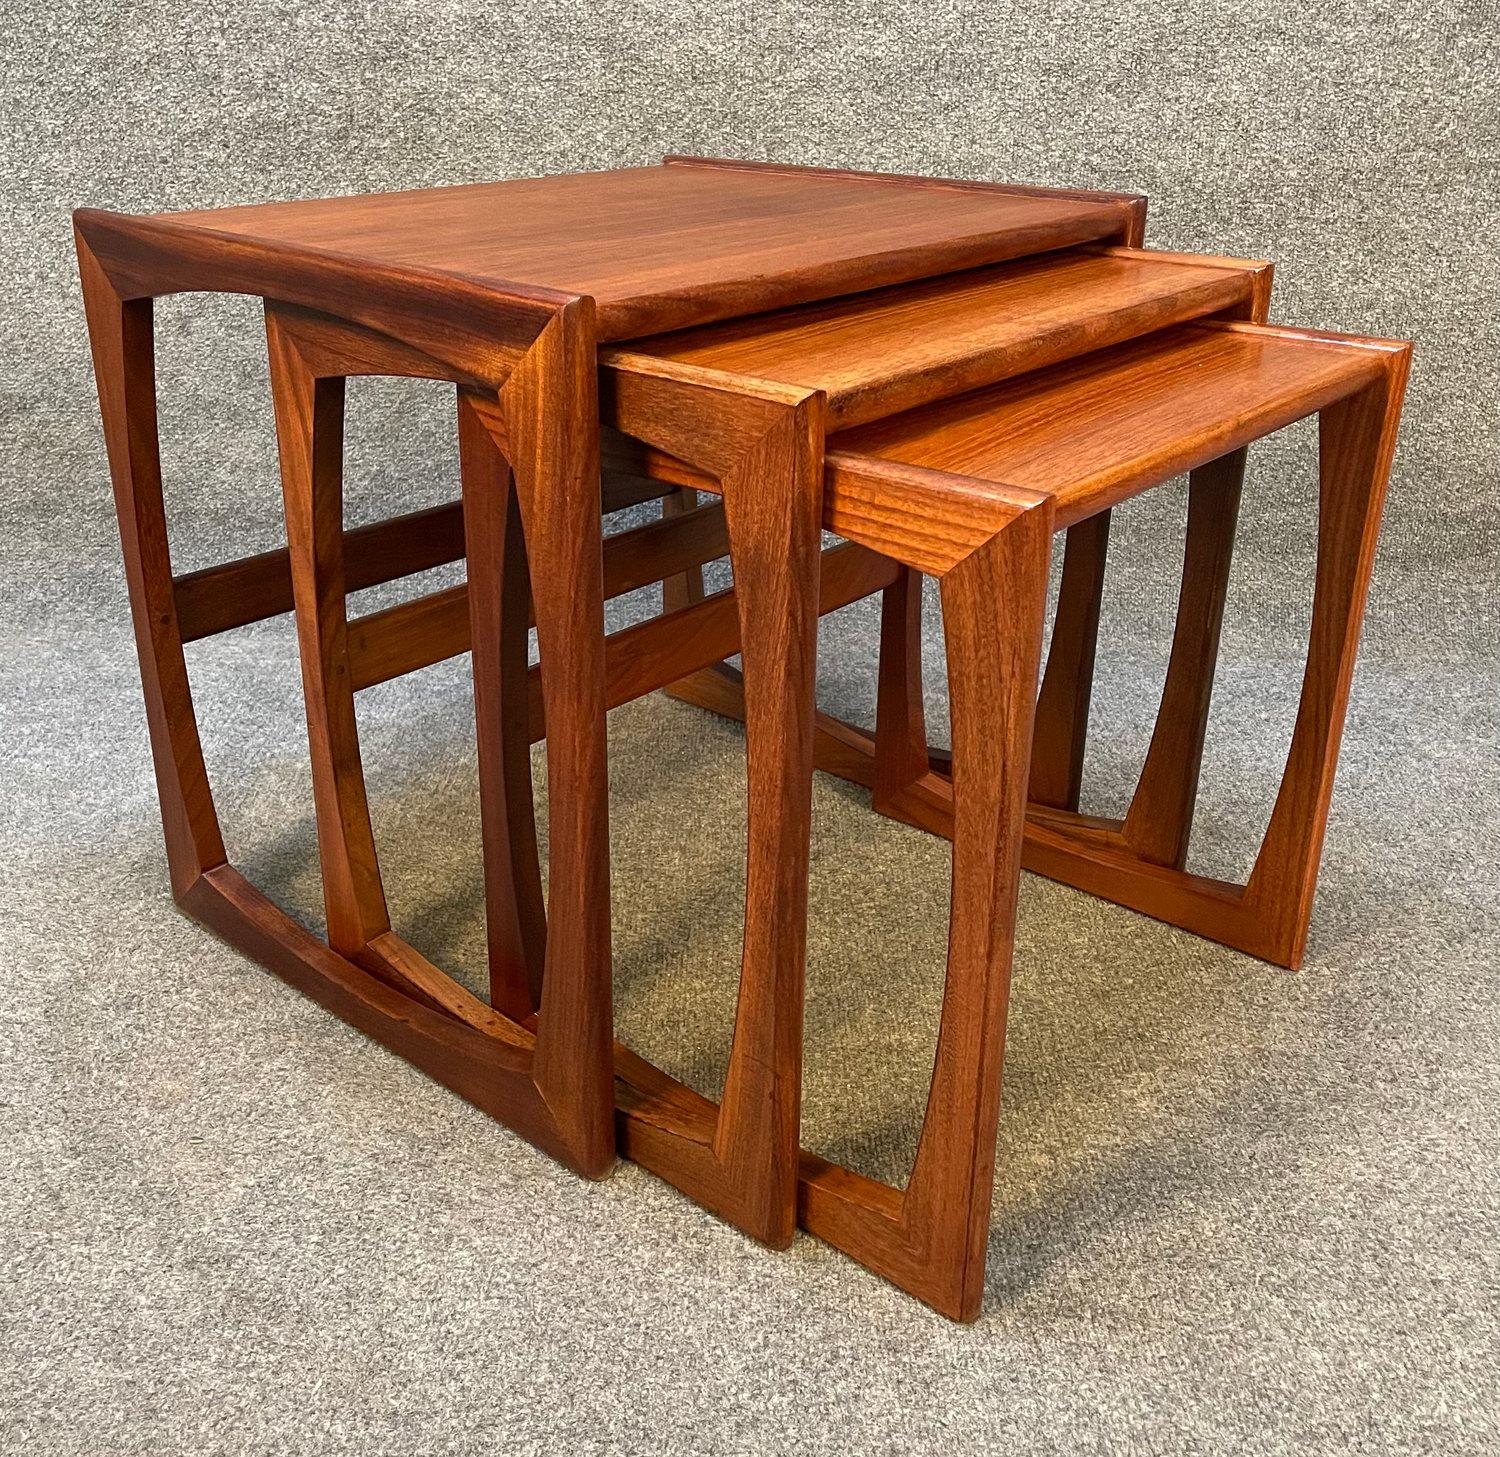 Here is a beautiful set of three nesting tables in teak wood designed by R. Bennett for the 